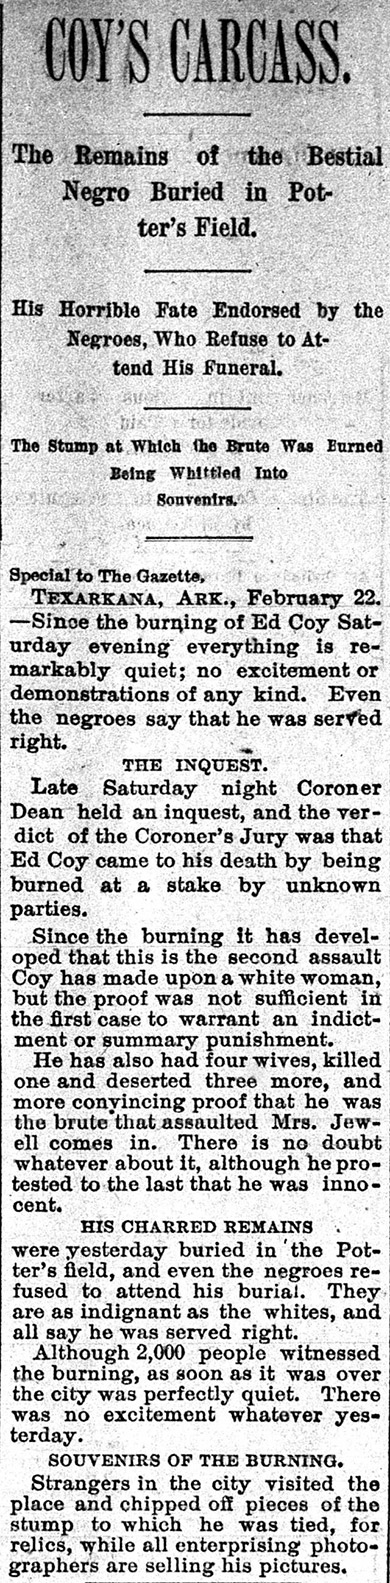 "Coy's Carcass" newspaper clipping